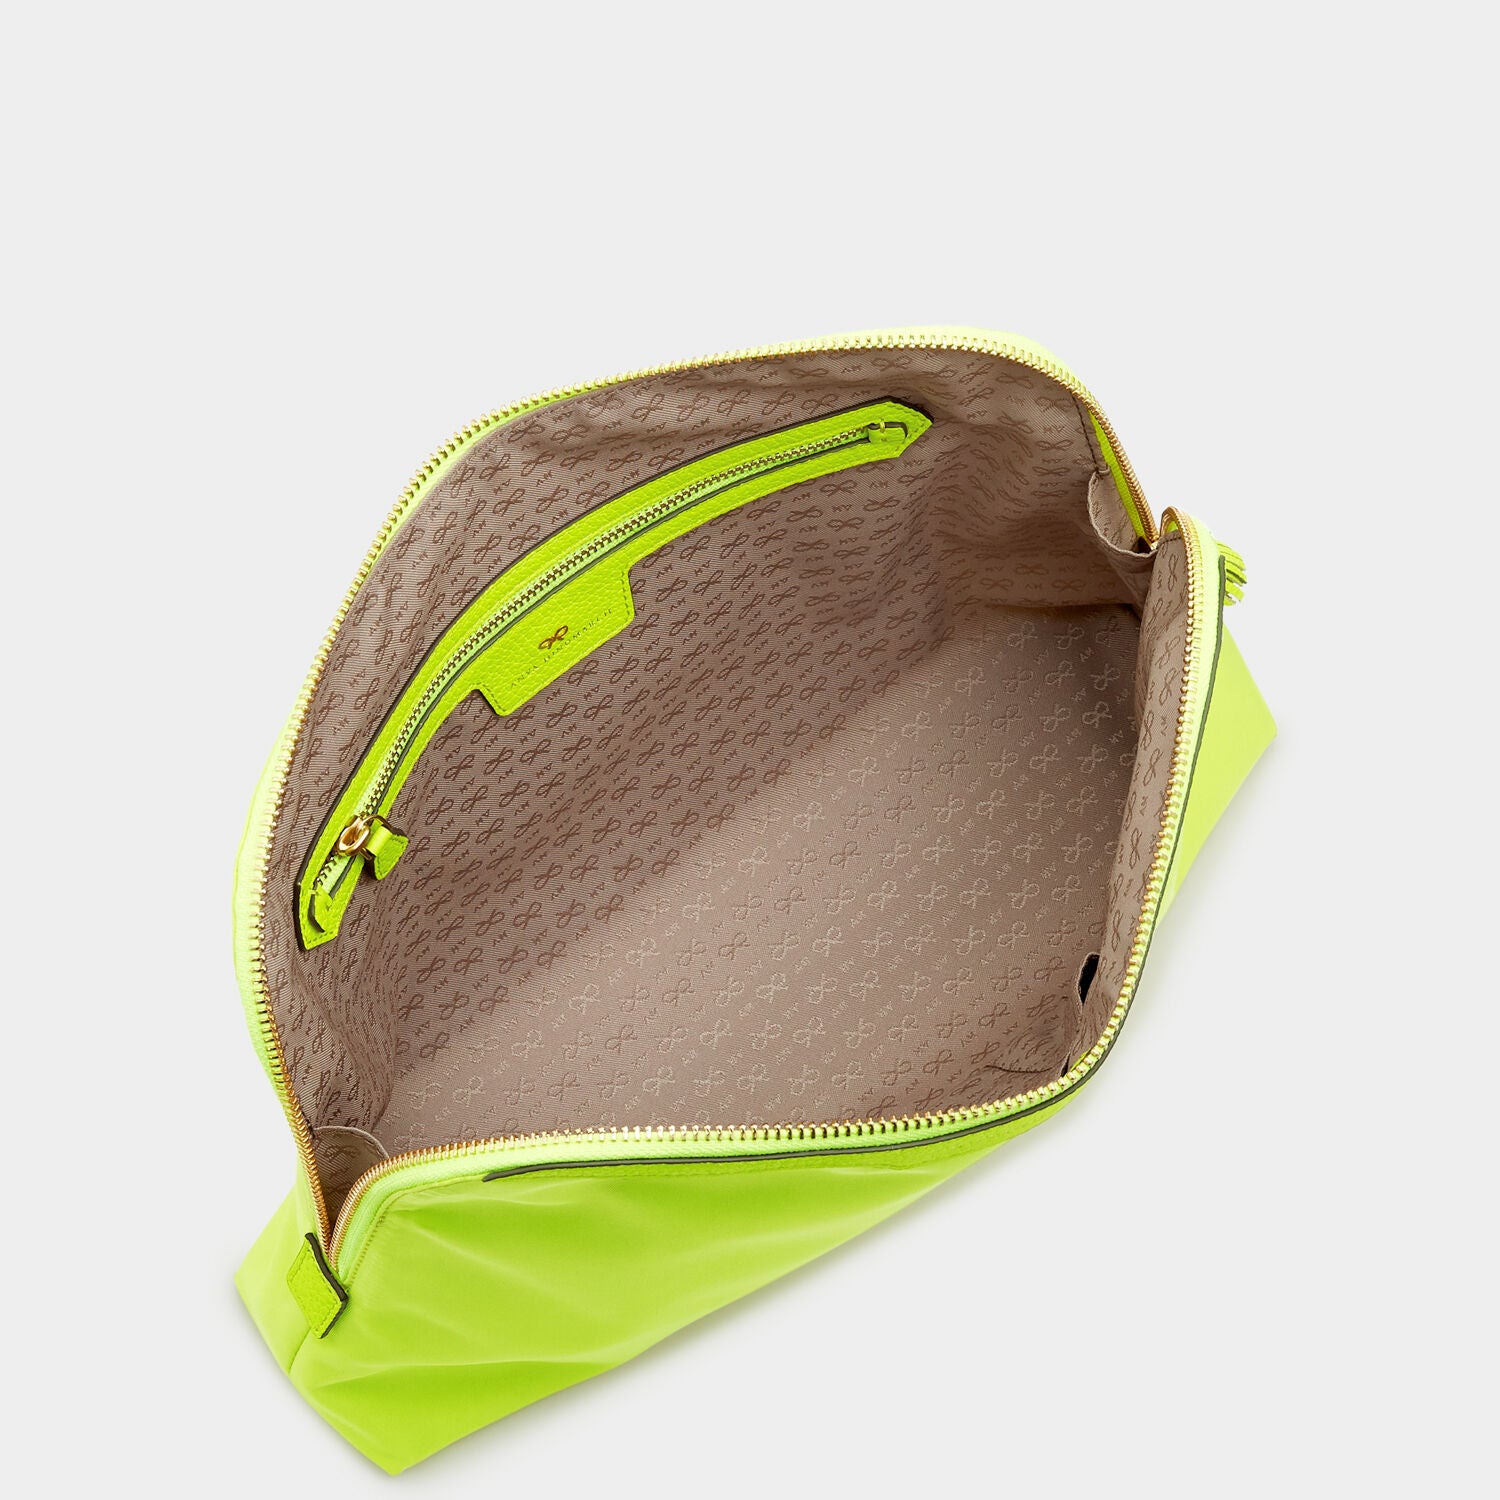 Lotions and Potions Pouch -

                  
                    ECONYL® in Neon Yellow -
                  

                  Anya Hindmarch UK
